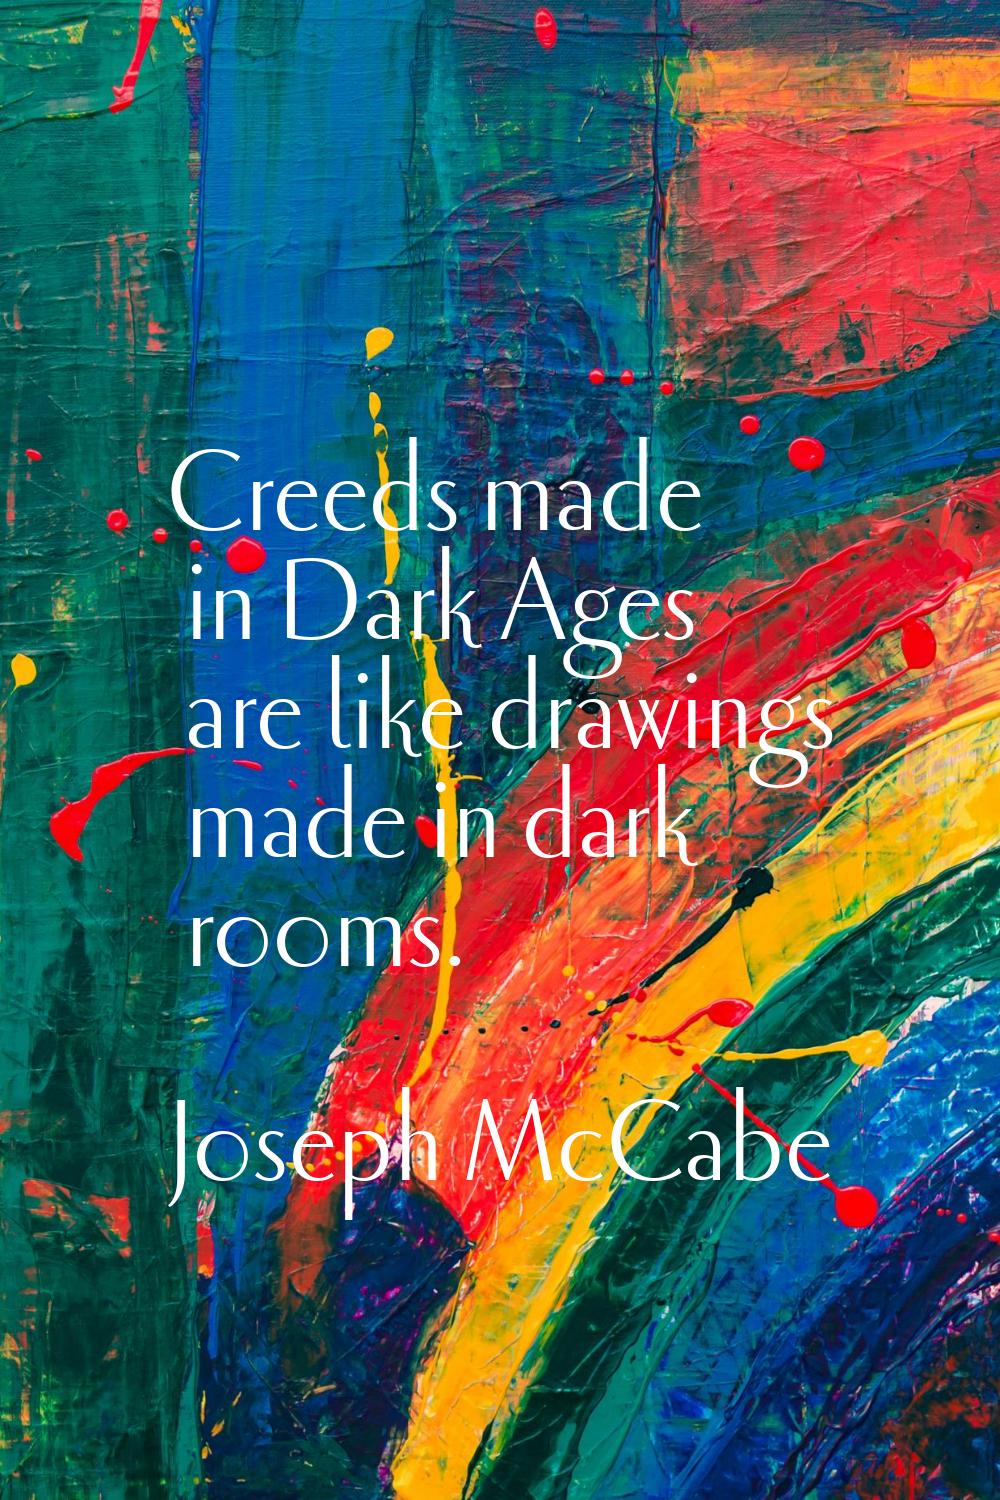 Creeds made in Dark Ages are like drawings made in dark rooms.